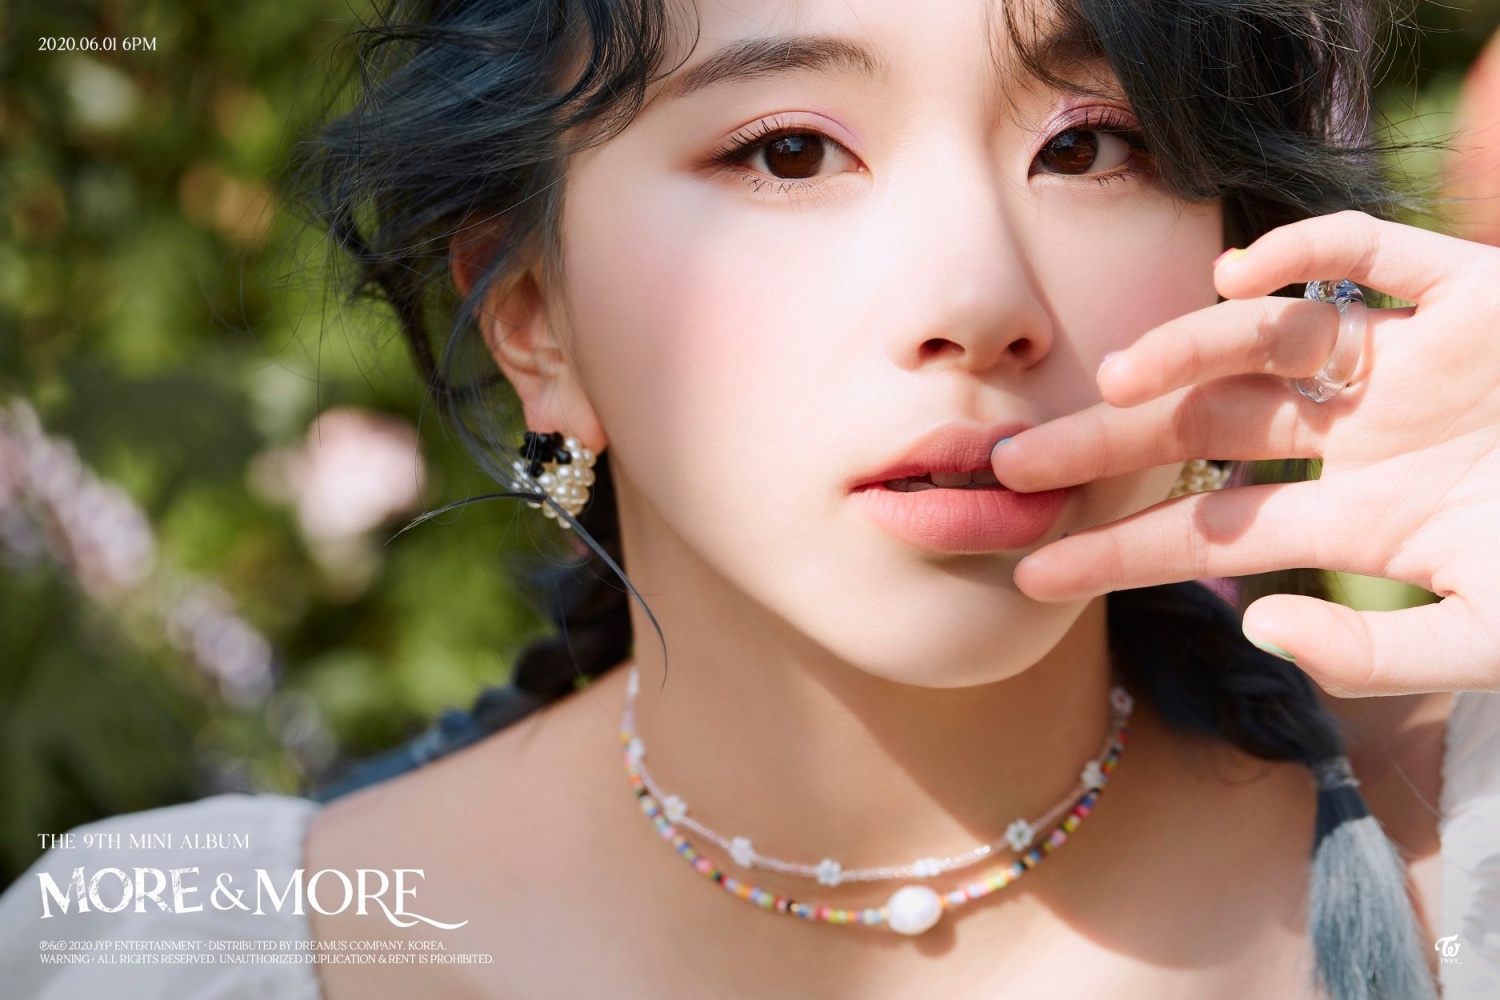 TWICE Chaeyoung is a Spring Goddess in Her Teaser for "MORE & MORE"